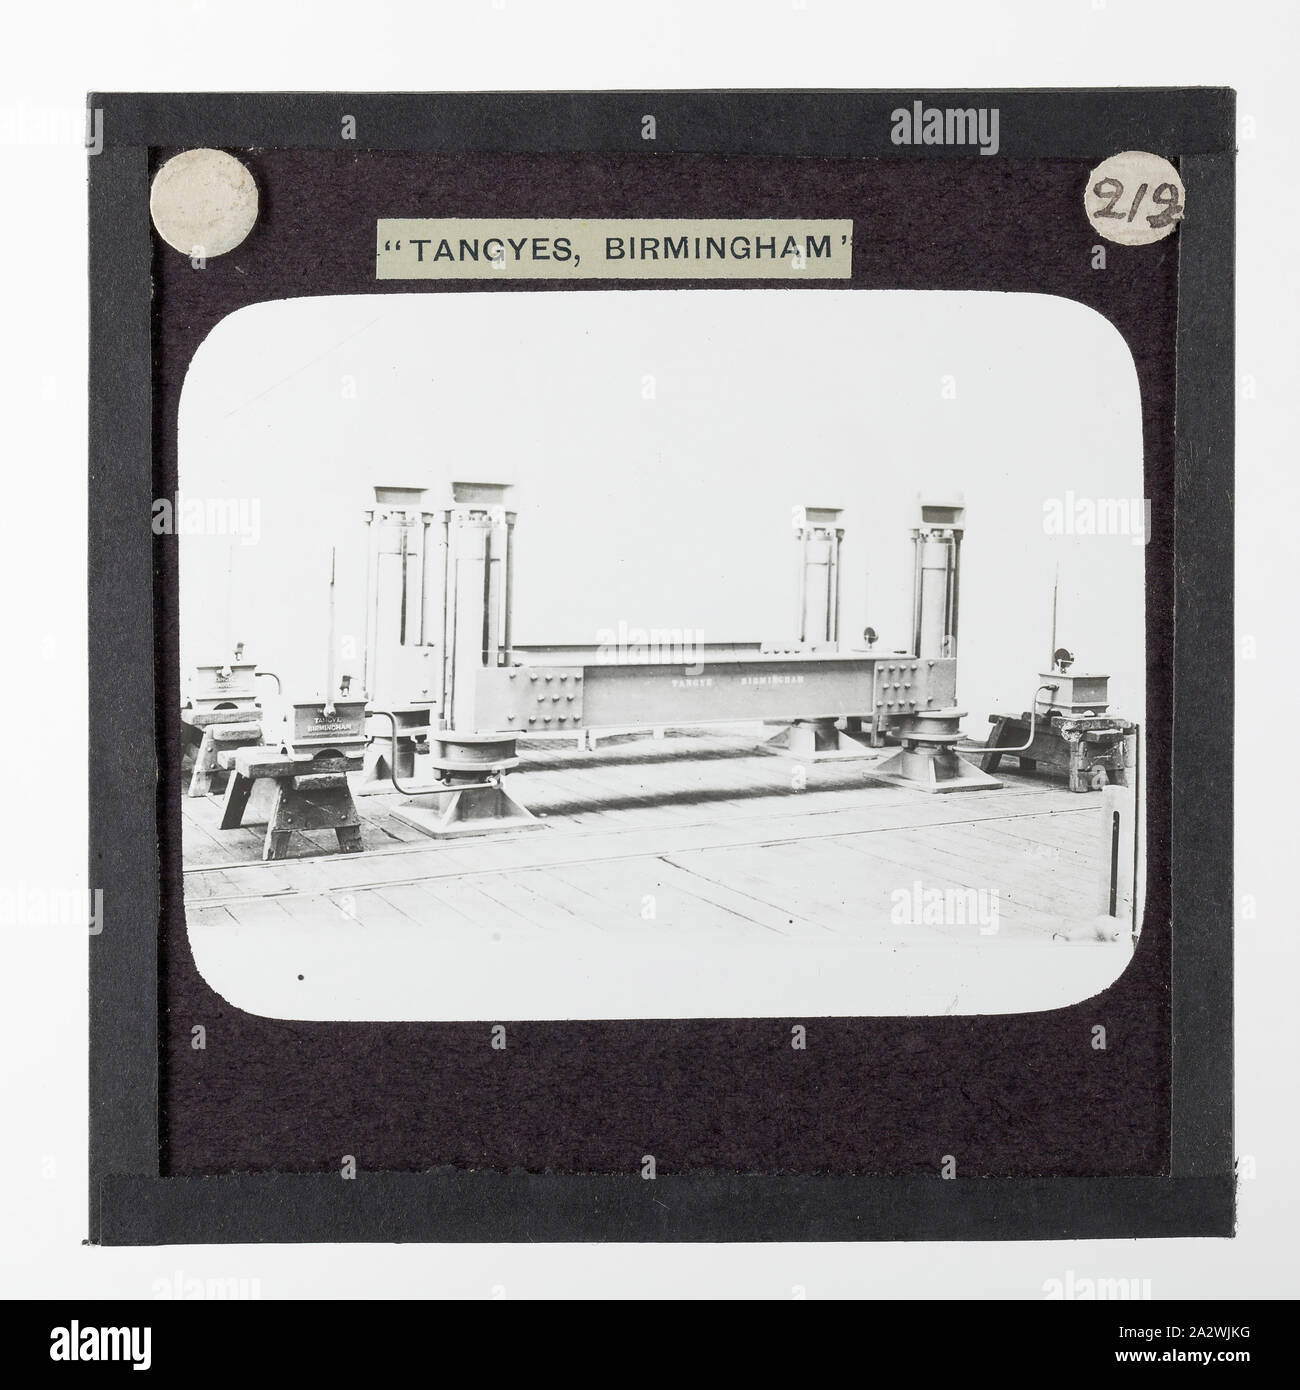 Lantern Slide - Tangyes Ltd, Beam Lifting Jack, circa 1910, One of 239 glass lantern slides depicting products manufactured by Tangyes Limited engineers of Birmingham, England. The images include various products such as engines, centrifugal pumps, hydraulic pumps, gas producers, materials testing machines, presses, machine tools, hydraulic jacks etc. Tangyes was a company which operated from 1857 to 1957. They produced a wide variety of engineering Stock Photo